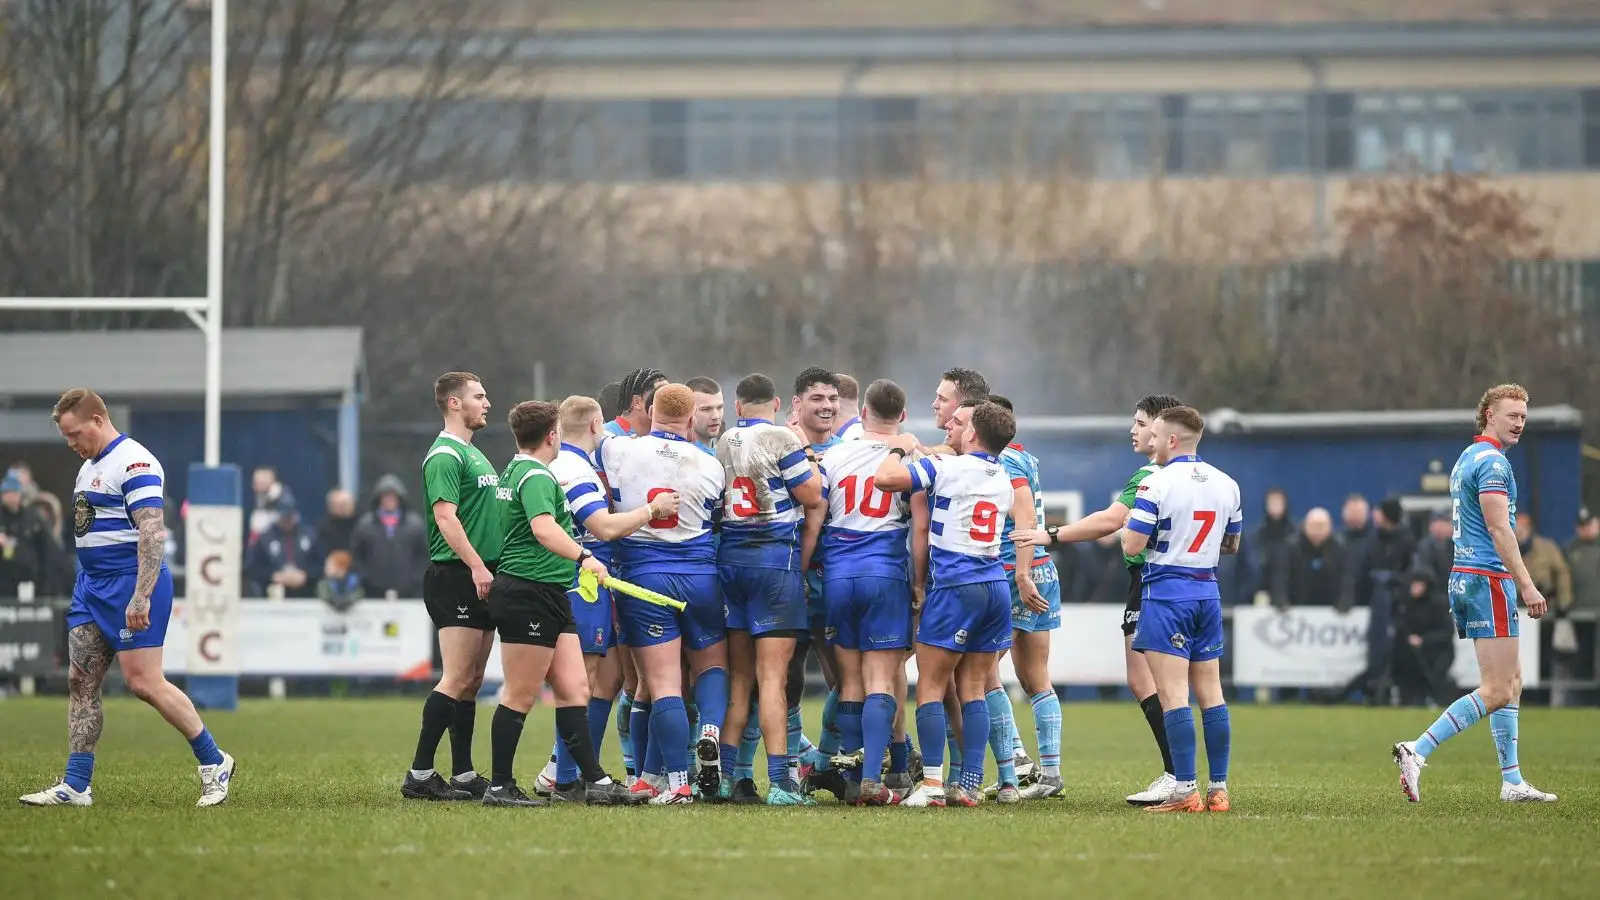 Wakefield Trinity stalwart banned with club confirming appeal as RFL release latest disciplinary review